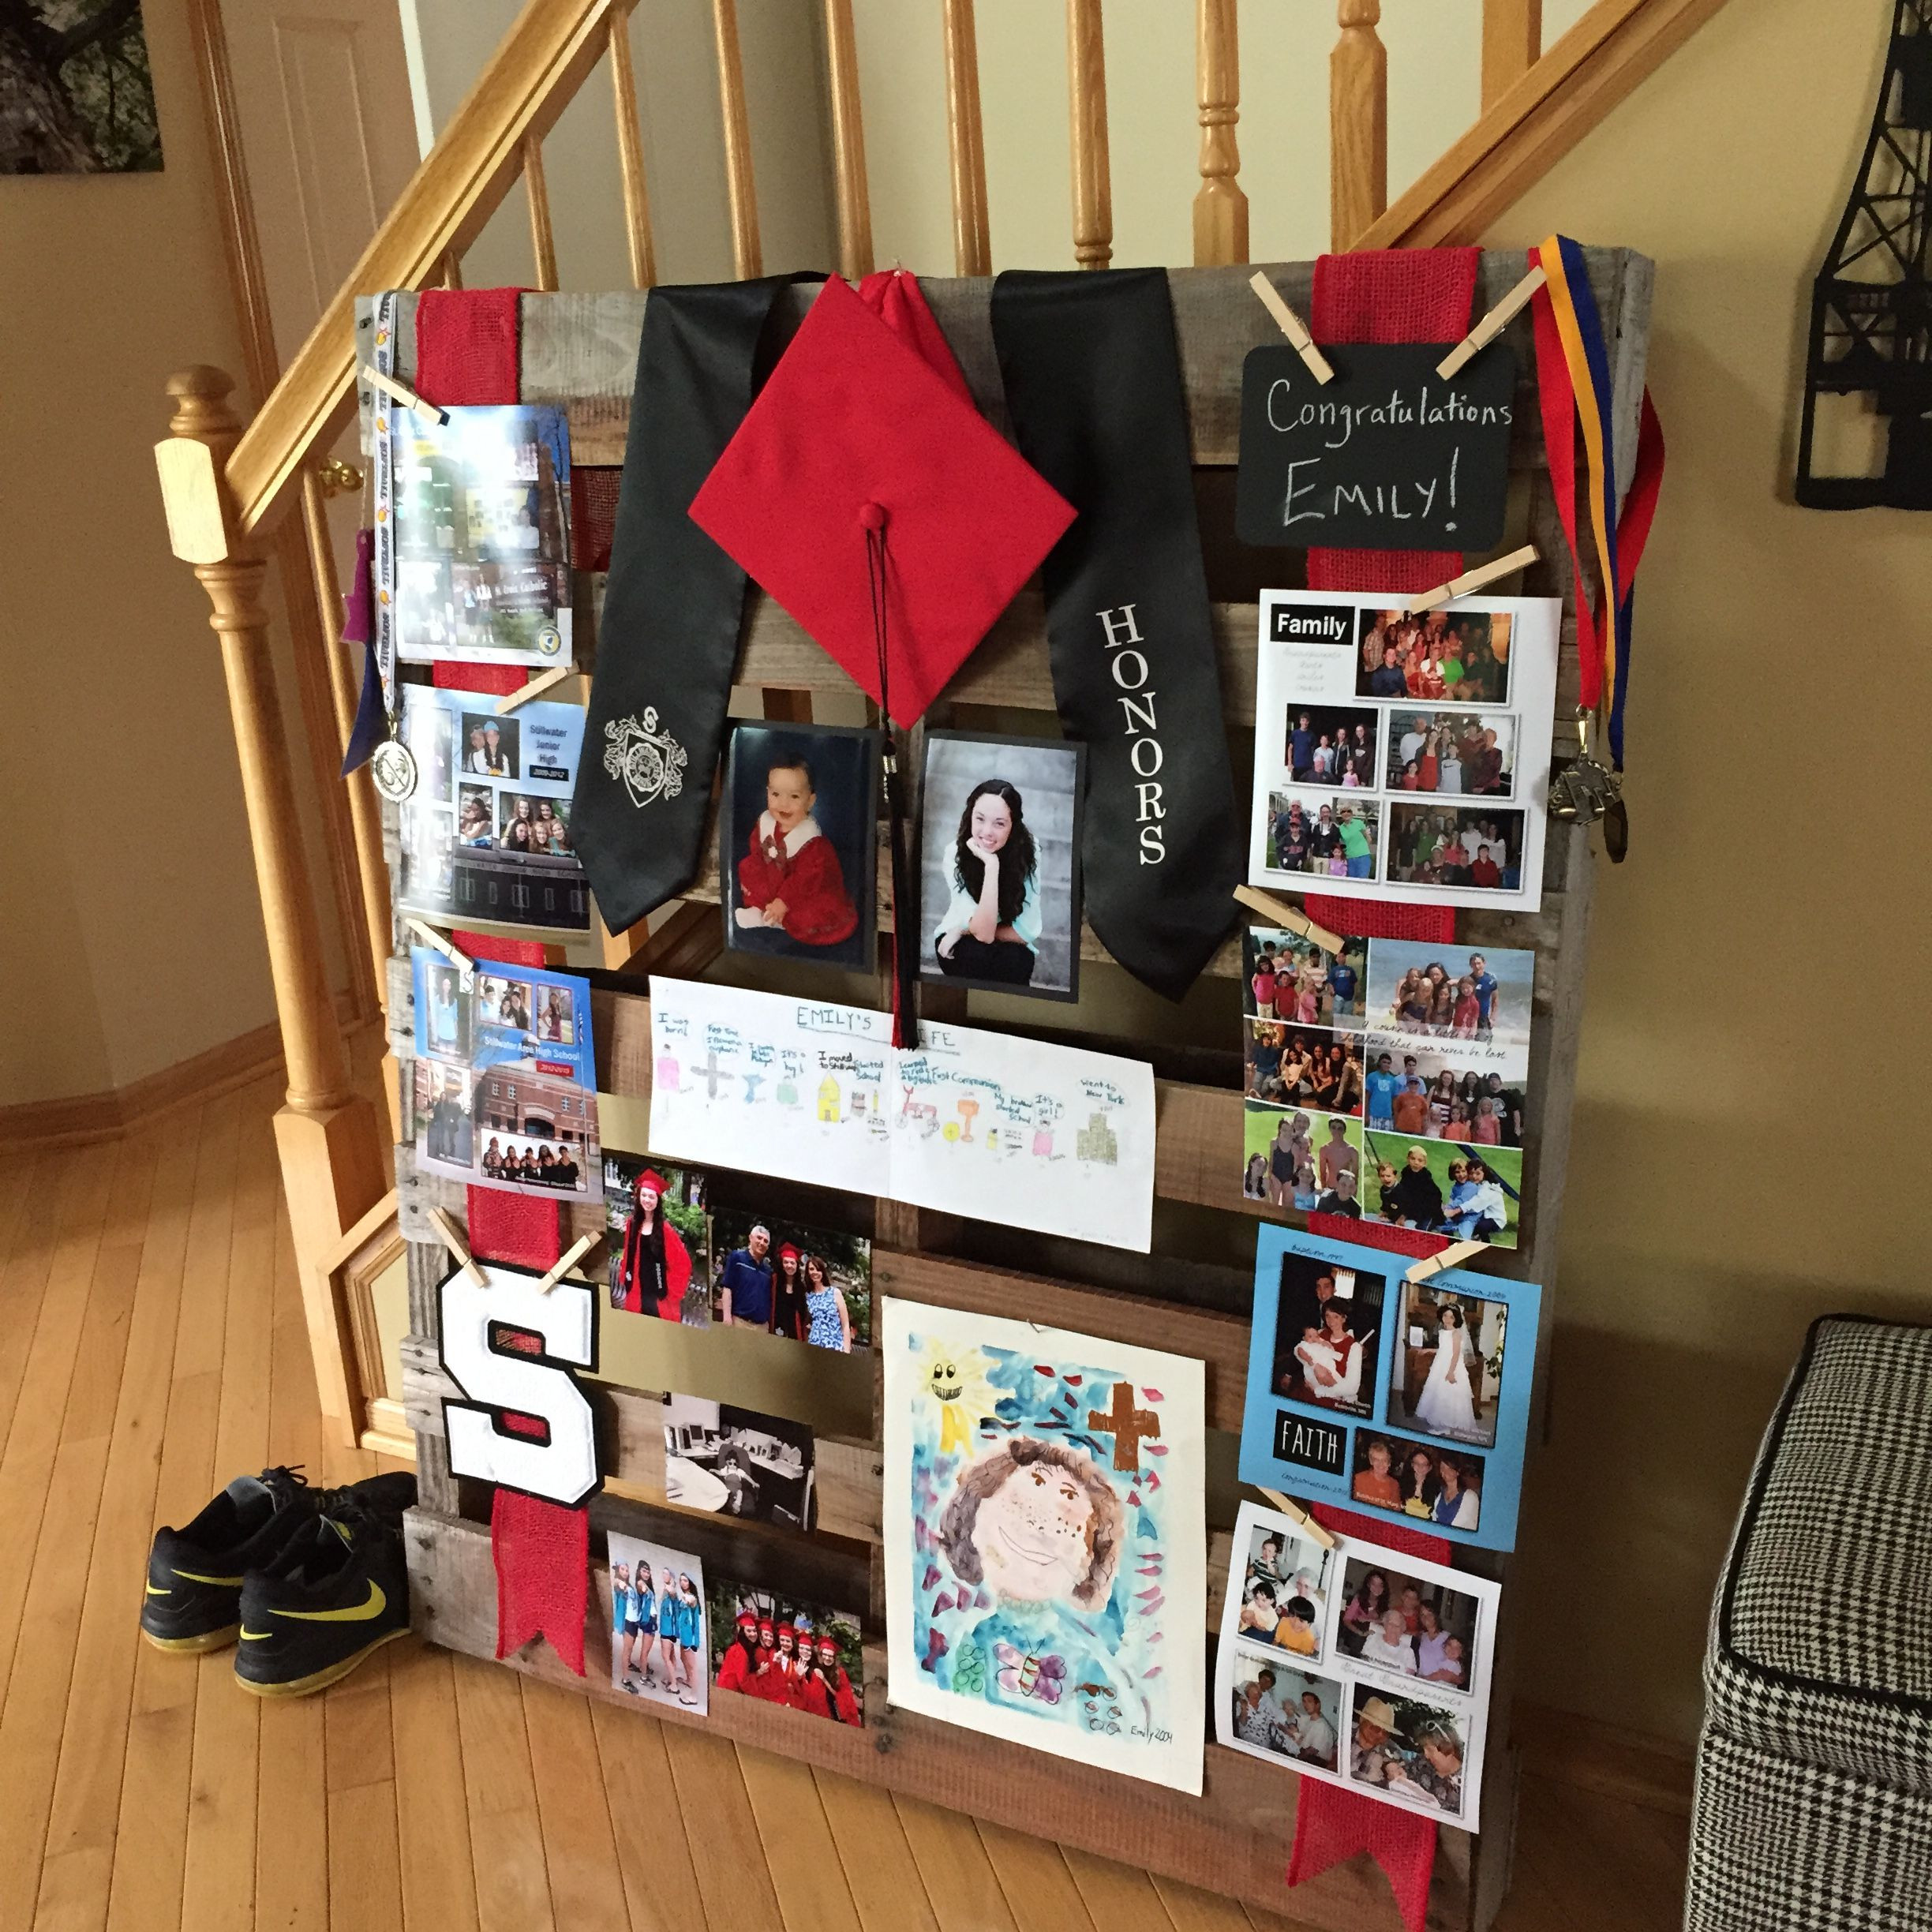 Graduation Party Display Ideas
 Fun graduation display made from a wooden pallet